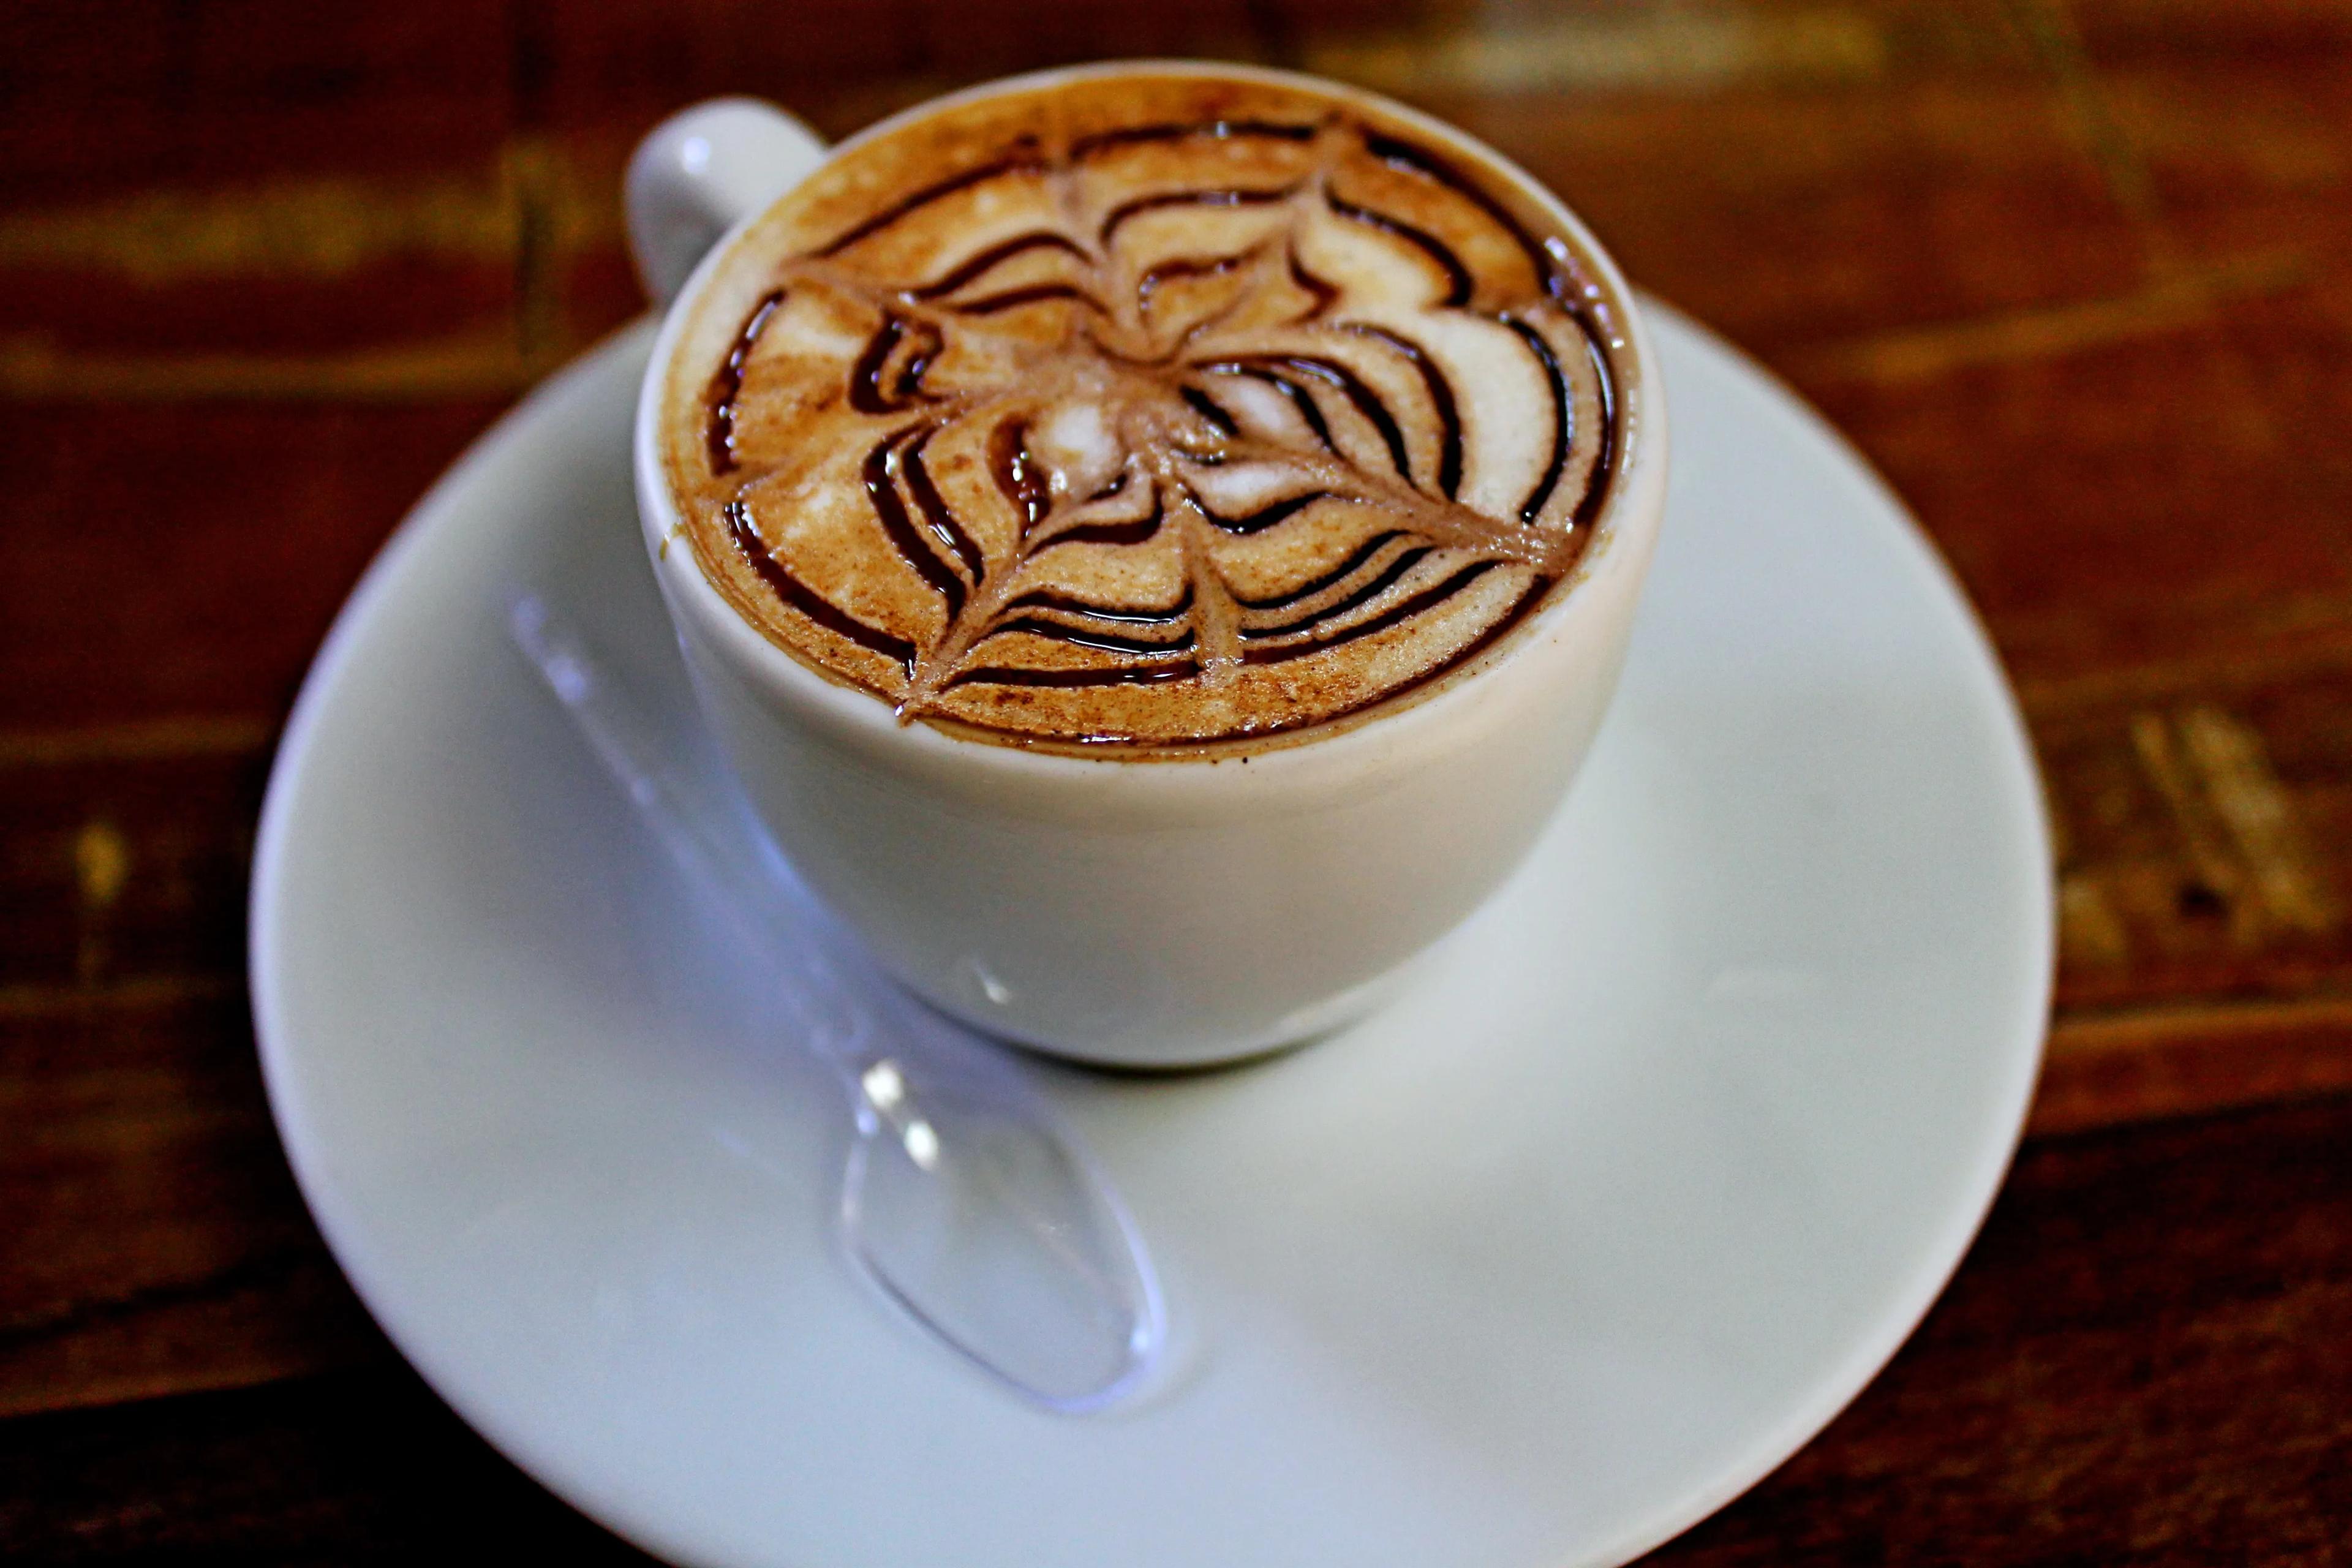 Free Images : latte, cappuccino, drink, coffee cup, caffeine, flavor ...